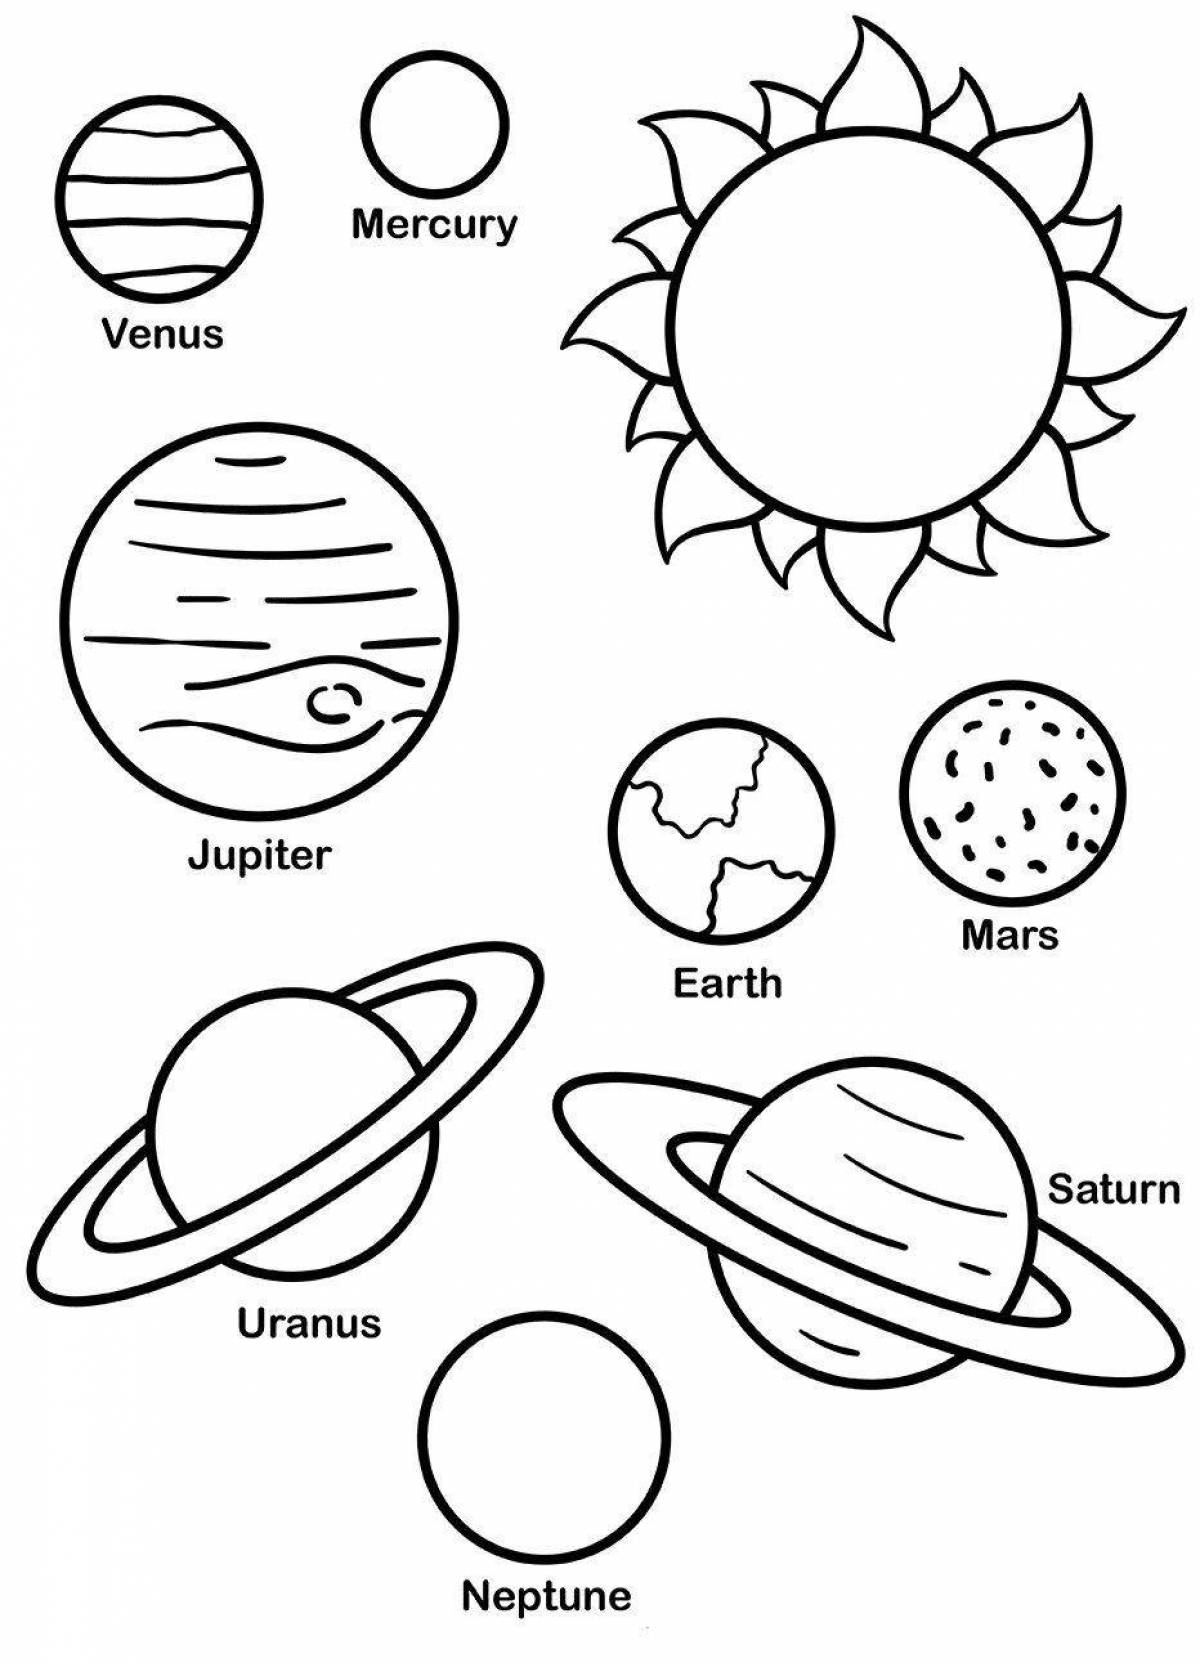 Planets for children aged 6 7 #4